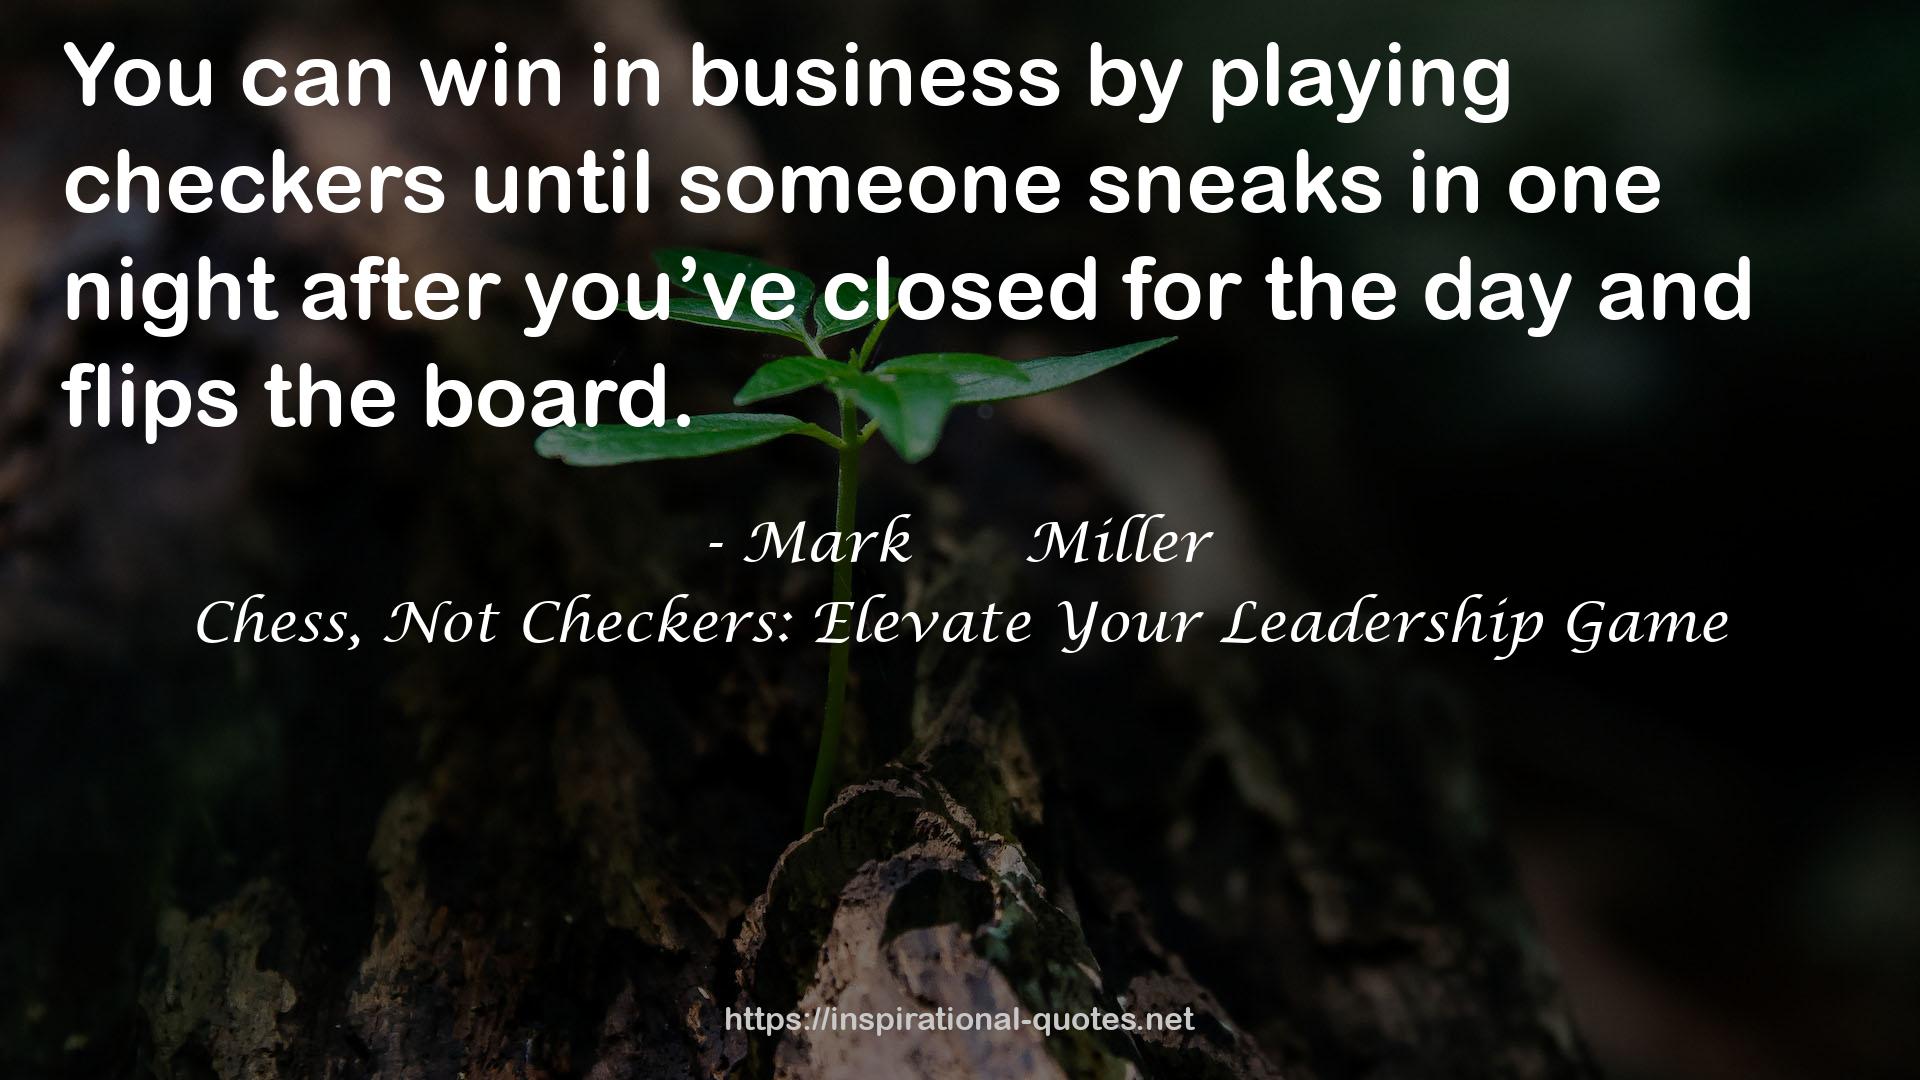 Chess, Not Checkers: Elevate Your Leadership Game QUOTES